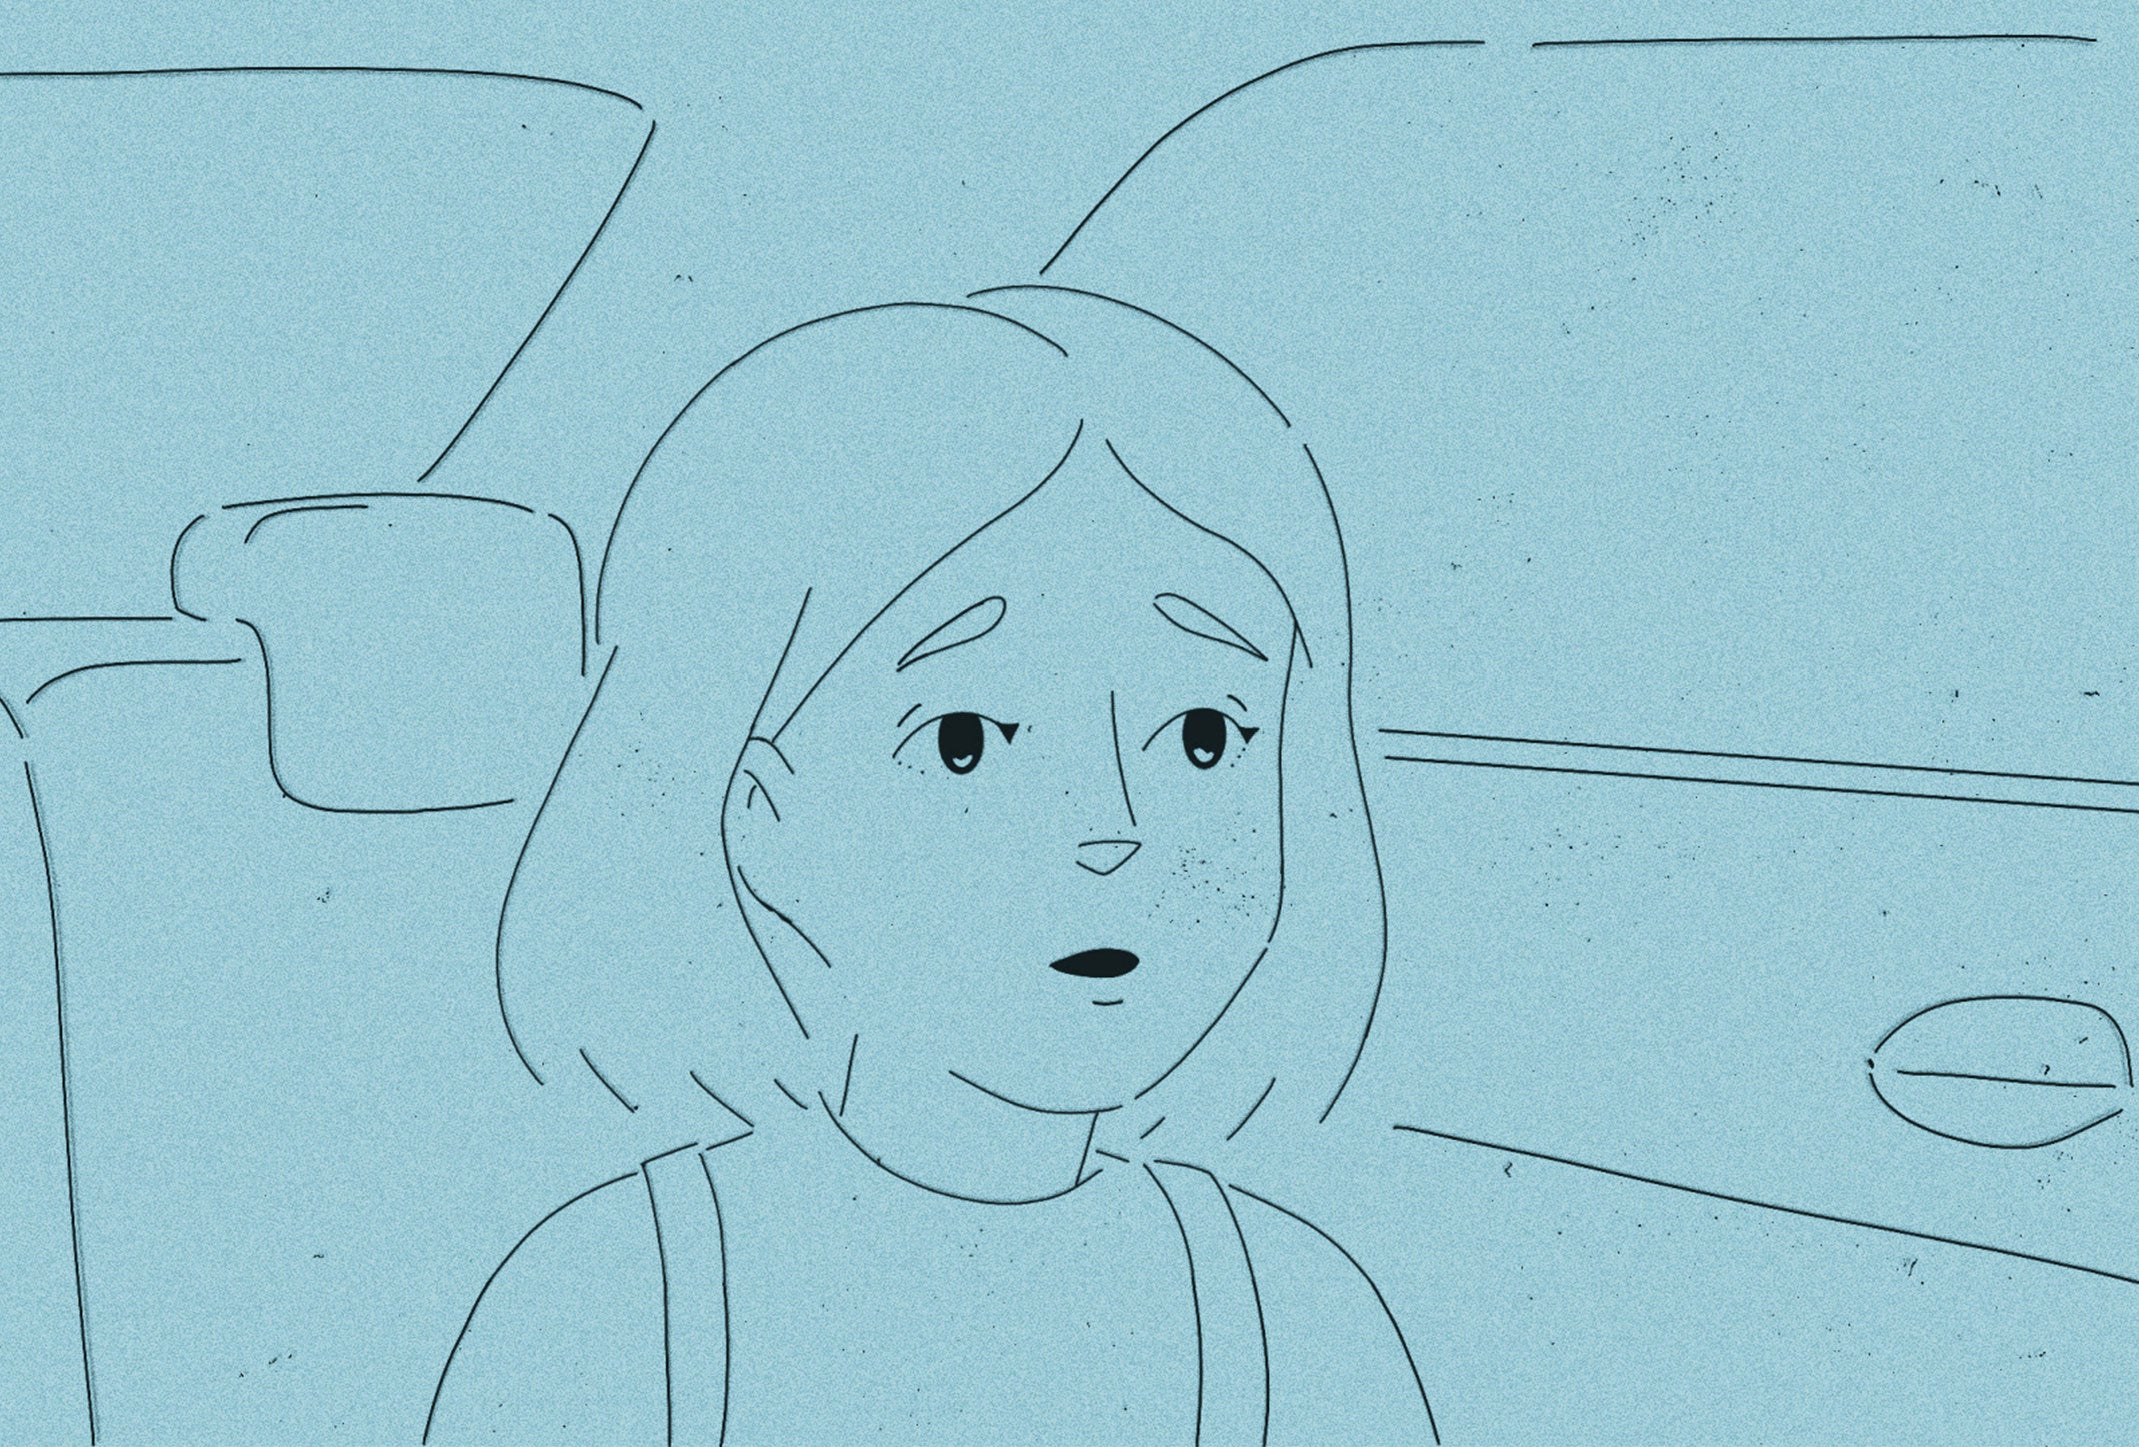 An animation for the film "finding dad" by the director Brit Phelan 